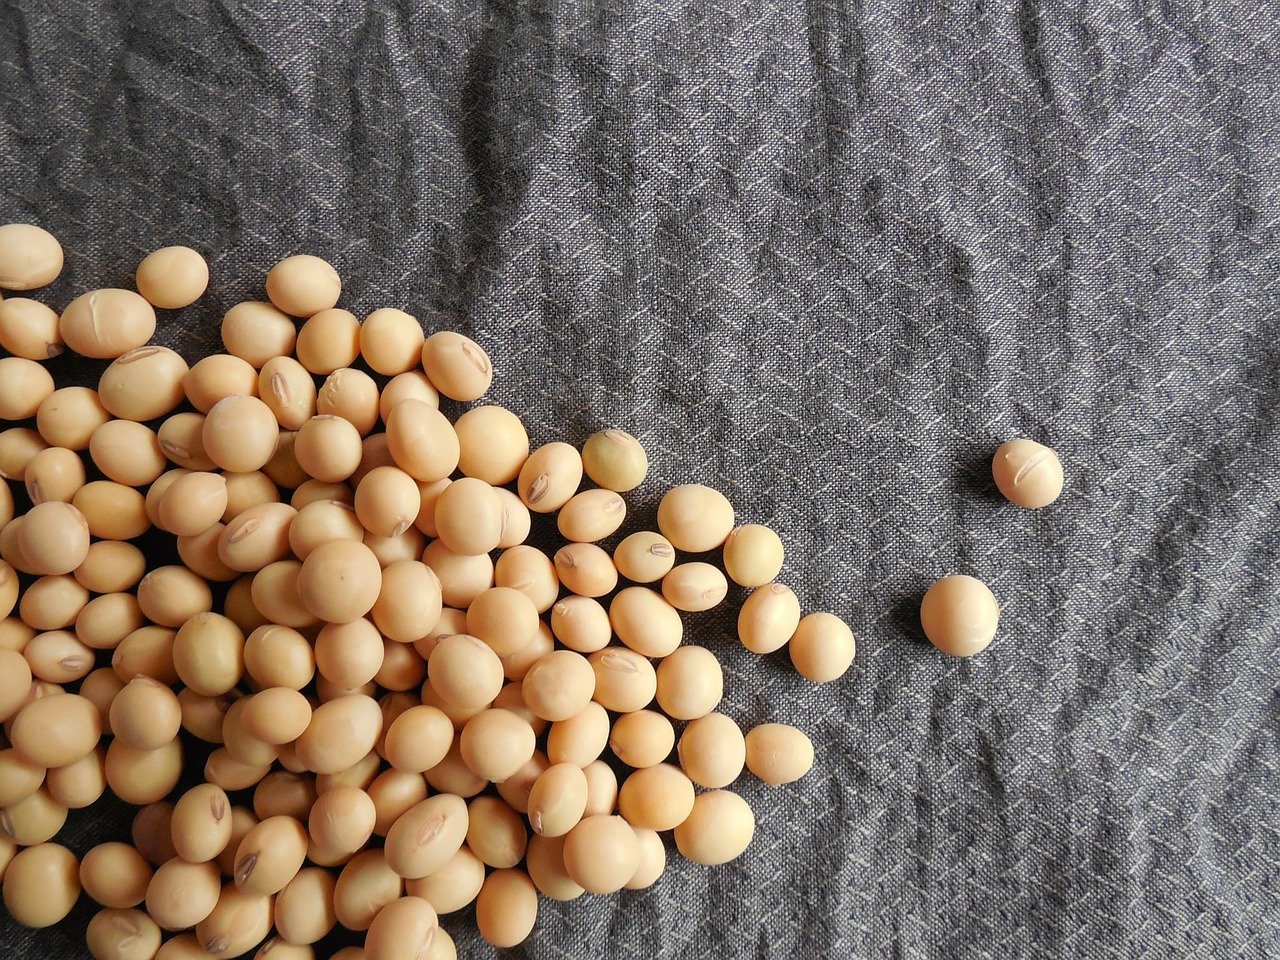 11 Reasons To Eat Natto (Japanese Soybeans)